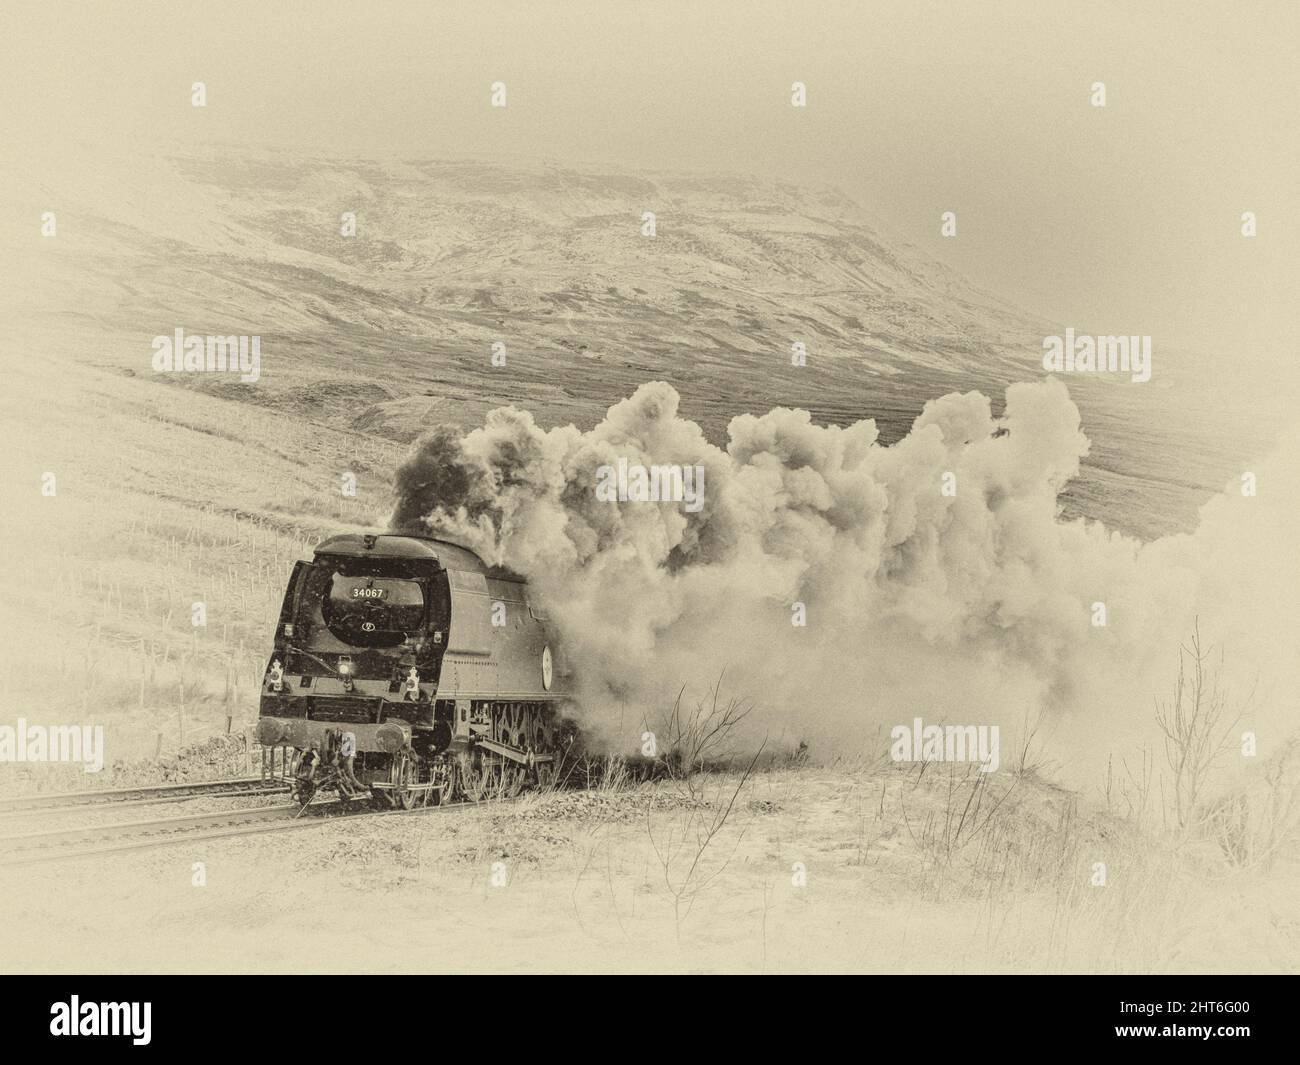 The image is of the Southern Railways Battle of Britain Class 4-6-2 #34067 Tangmere approaching Ais Gill summit on the Settle to Carlisle line in the Stock Photo